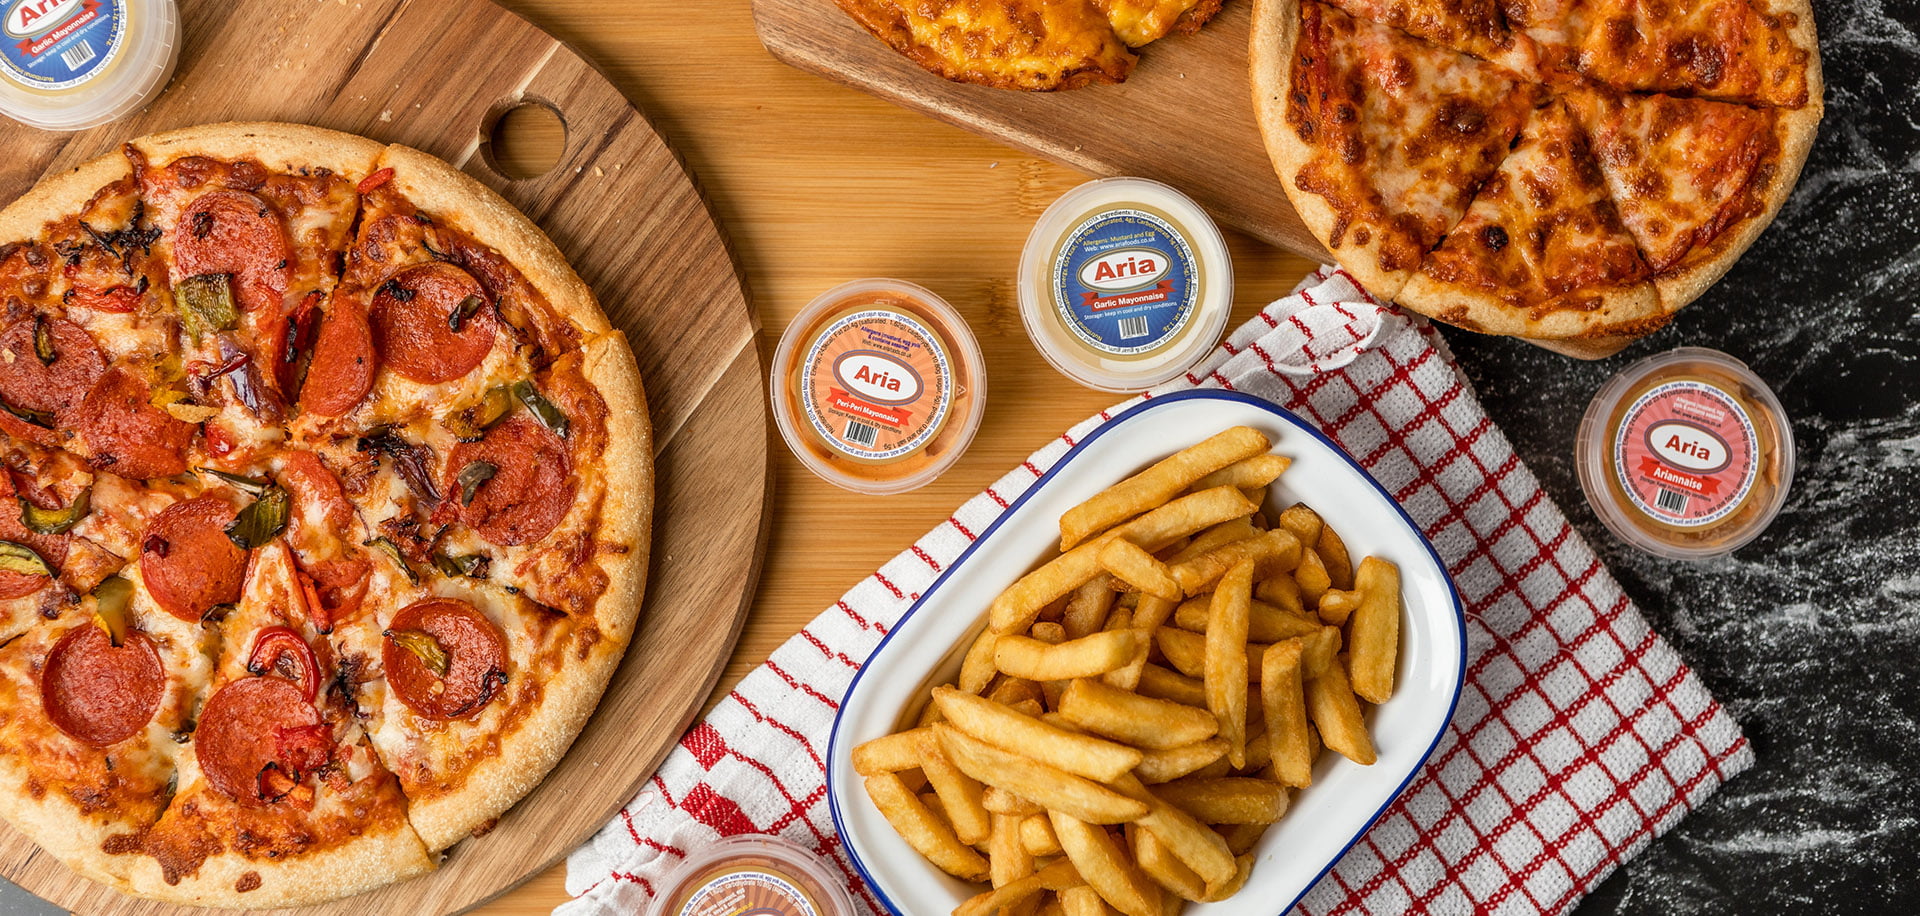 Delicious Aria Sauces with Pepperoni Pizza & Chips